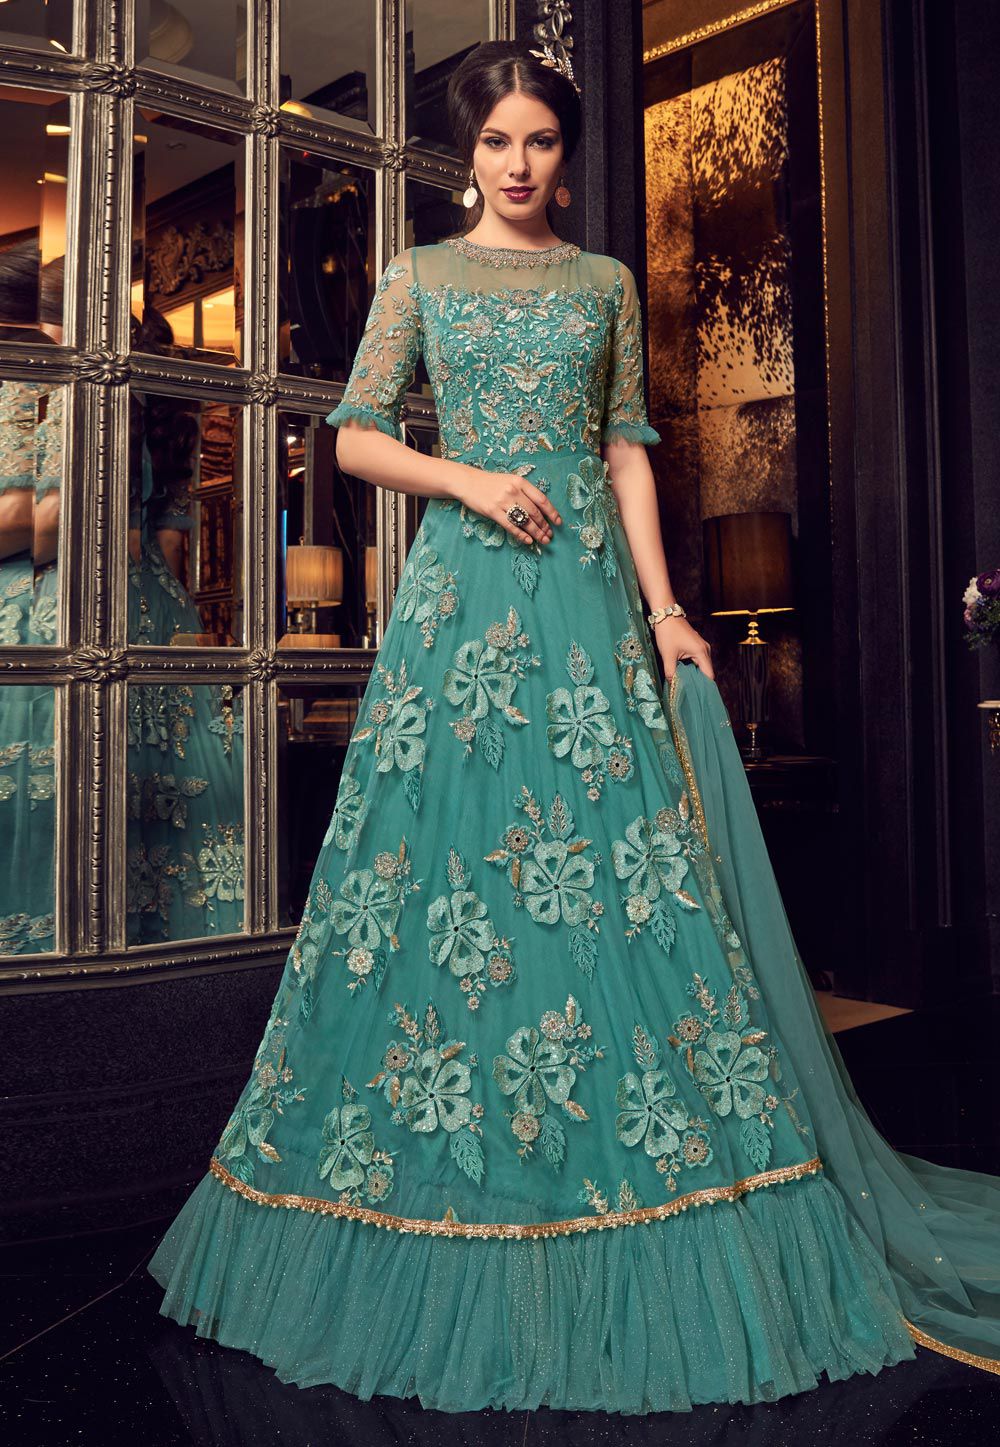 50 New and Different Models of Indian Dress Designs in 2023 | Indian dresses,  Party wear indian dresses, Fashion dresses